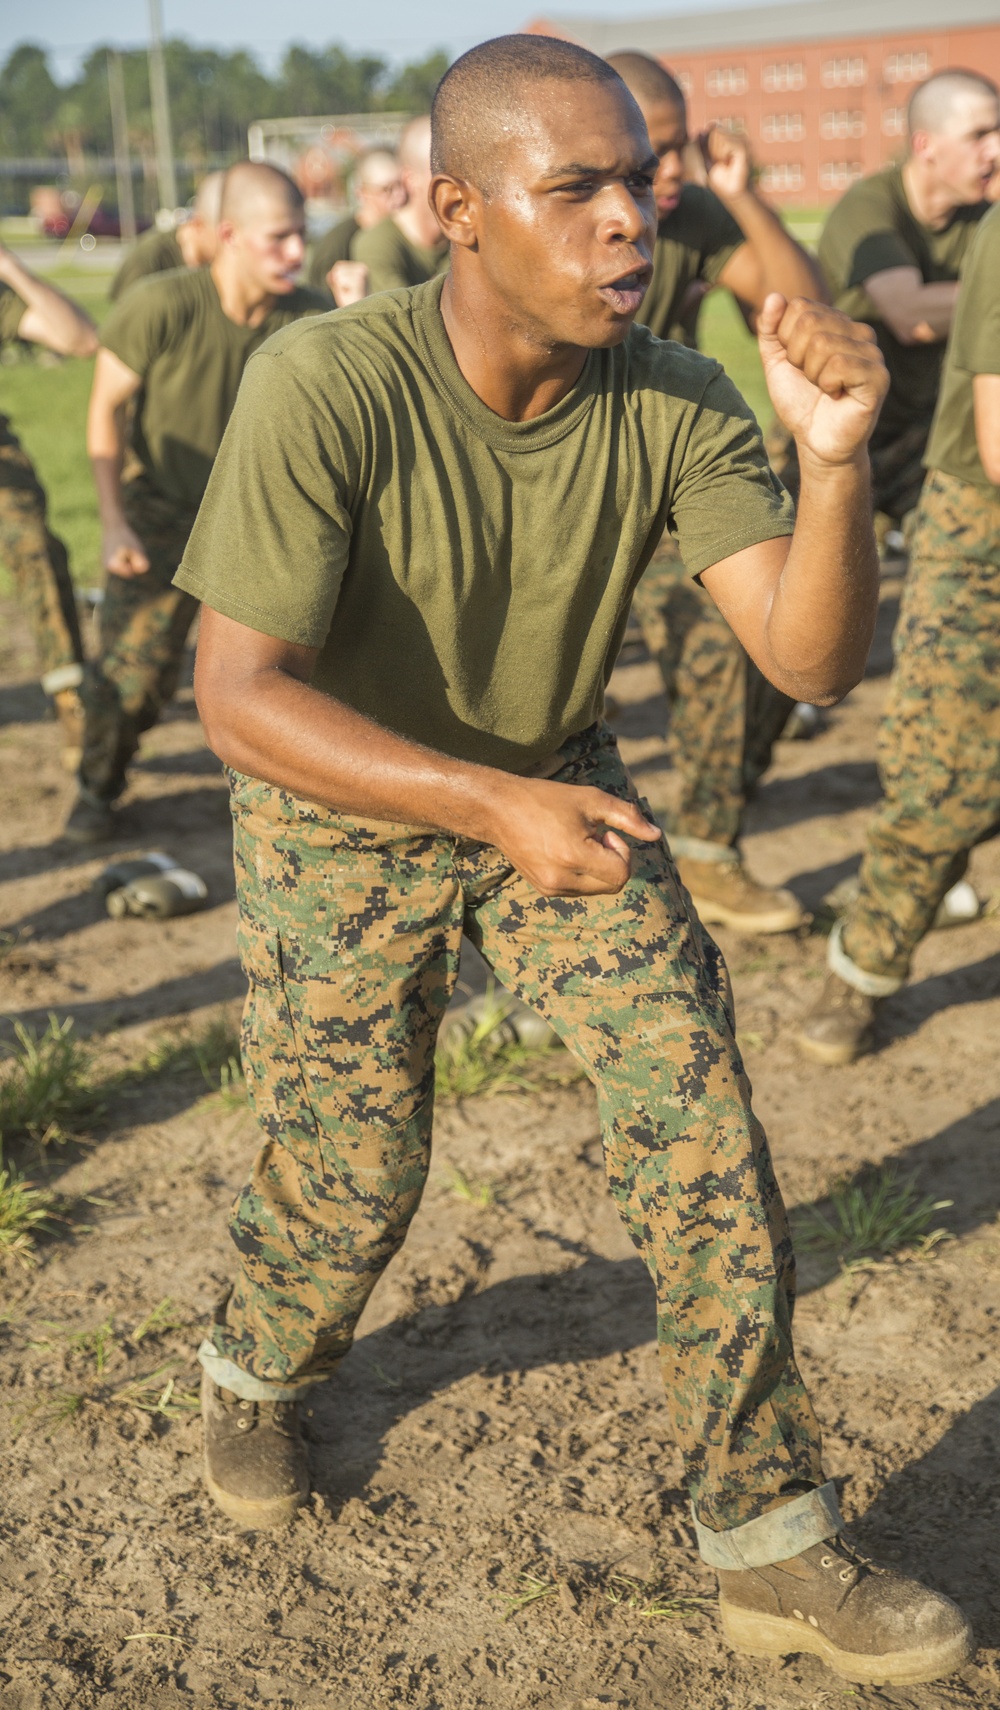 Parris Island recruits strike blows during Marine Corps martial arts training